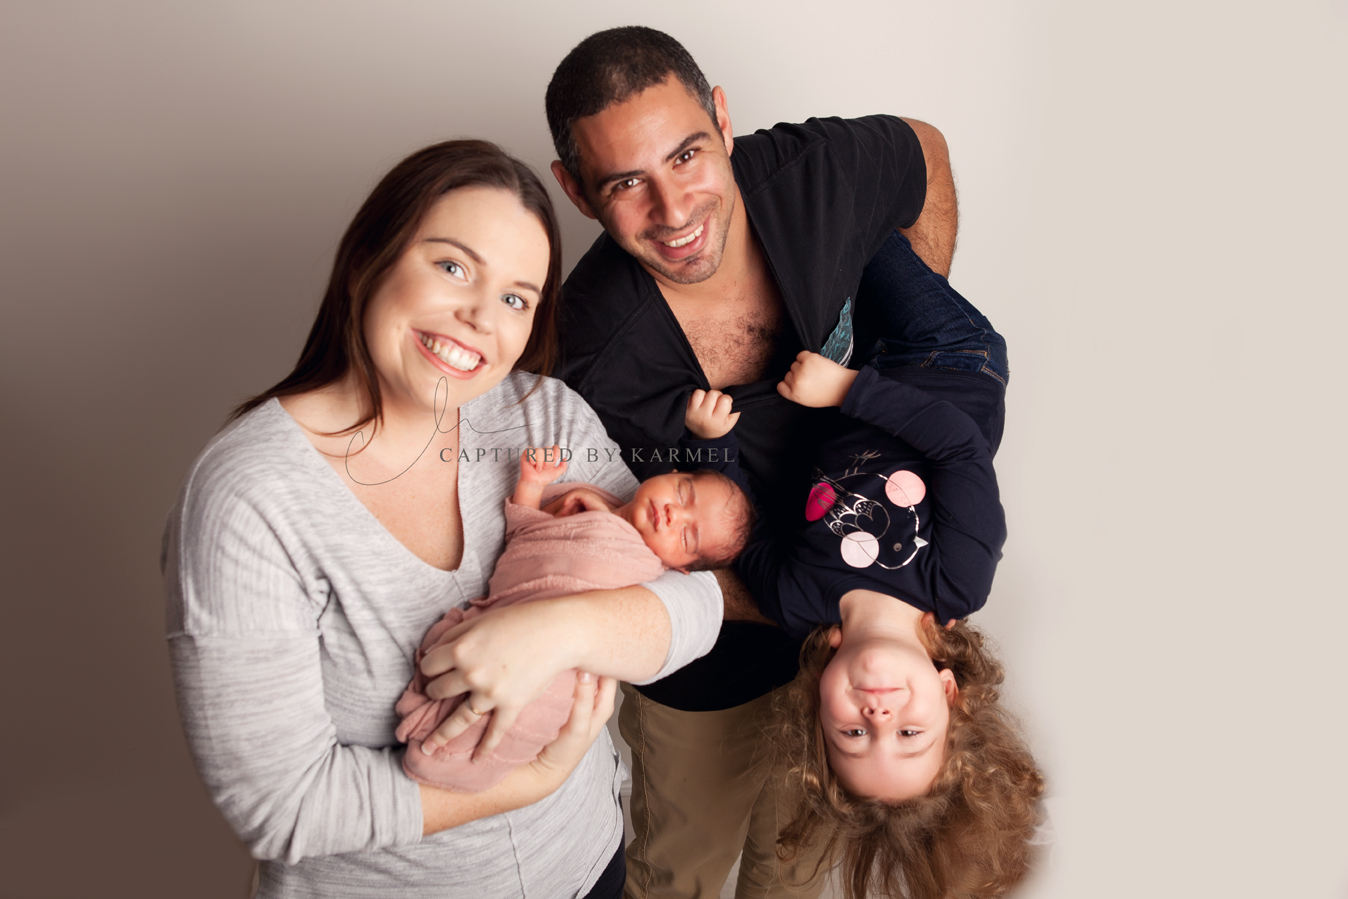 Tips for photographing newborn and siblings